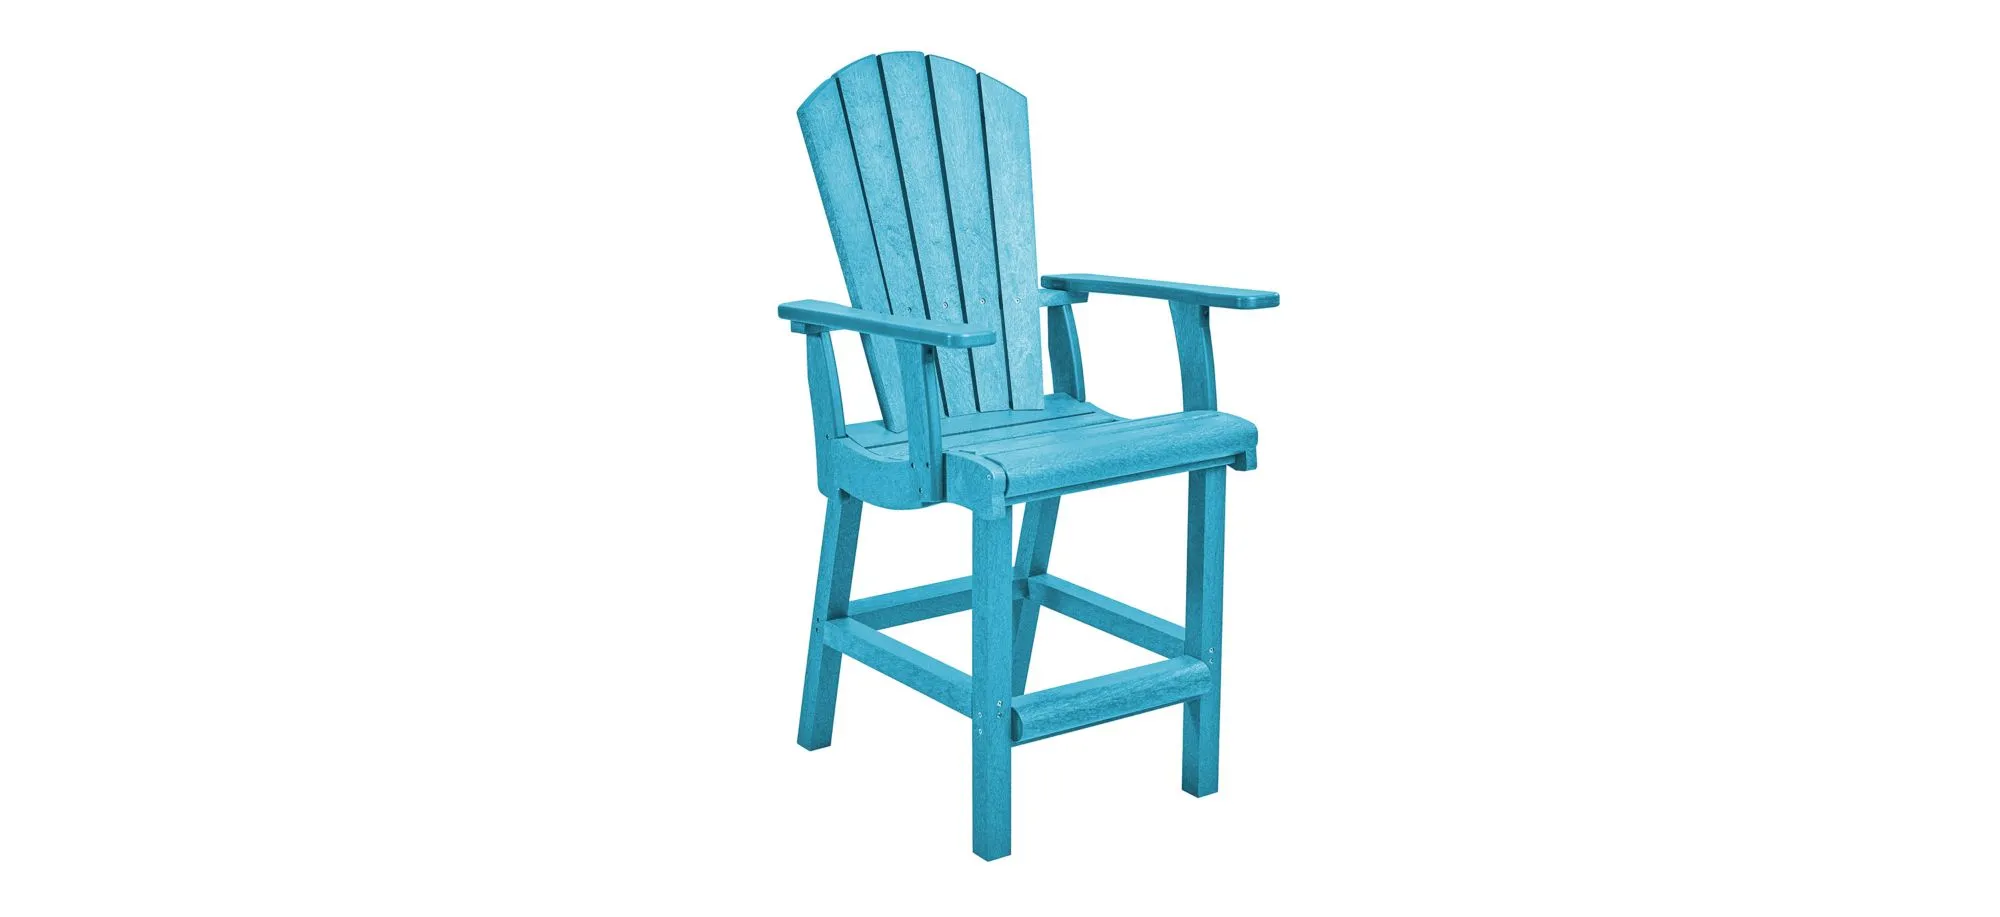 Generation Recycled Outdoor Counter Height Arm Chair in Turquoise by C.R. Plastic Products